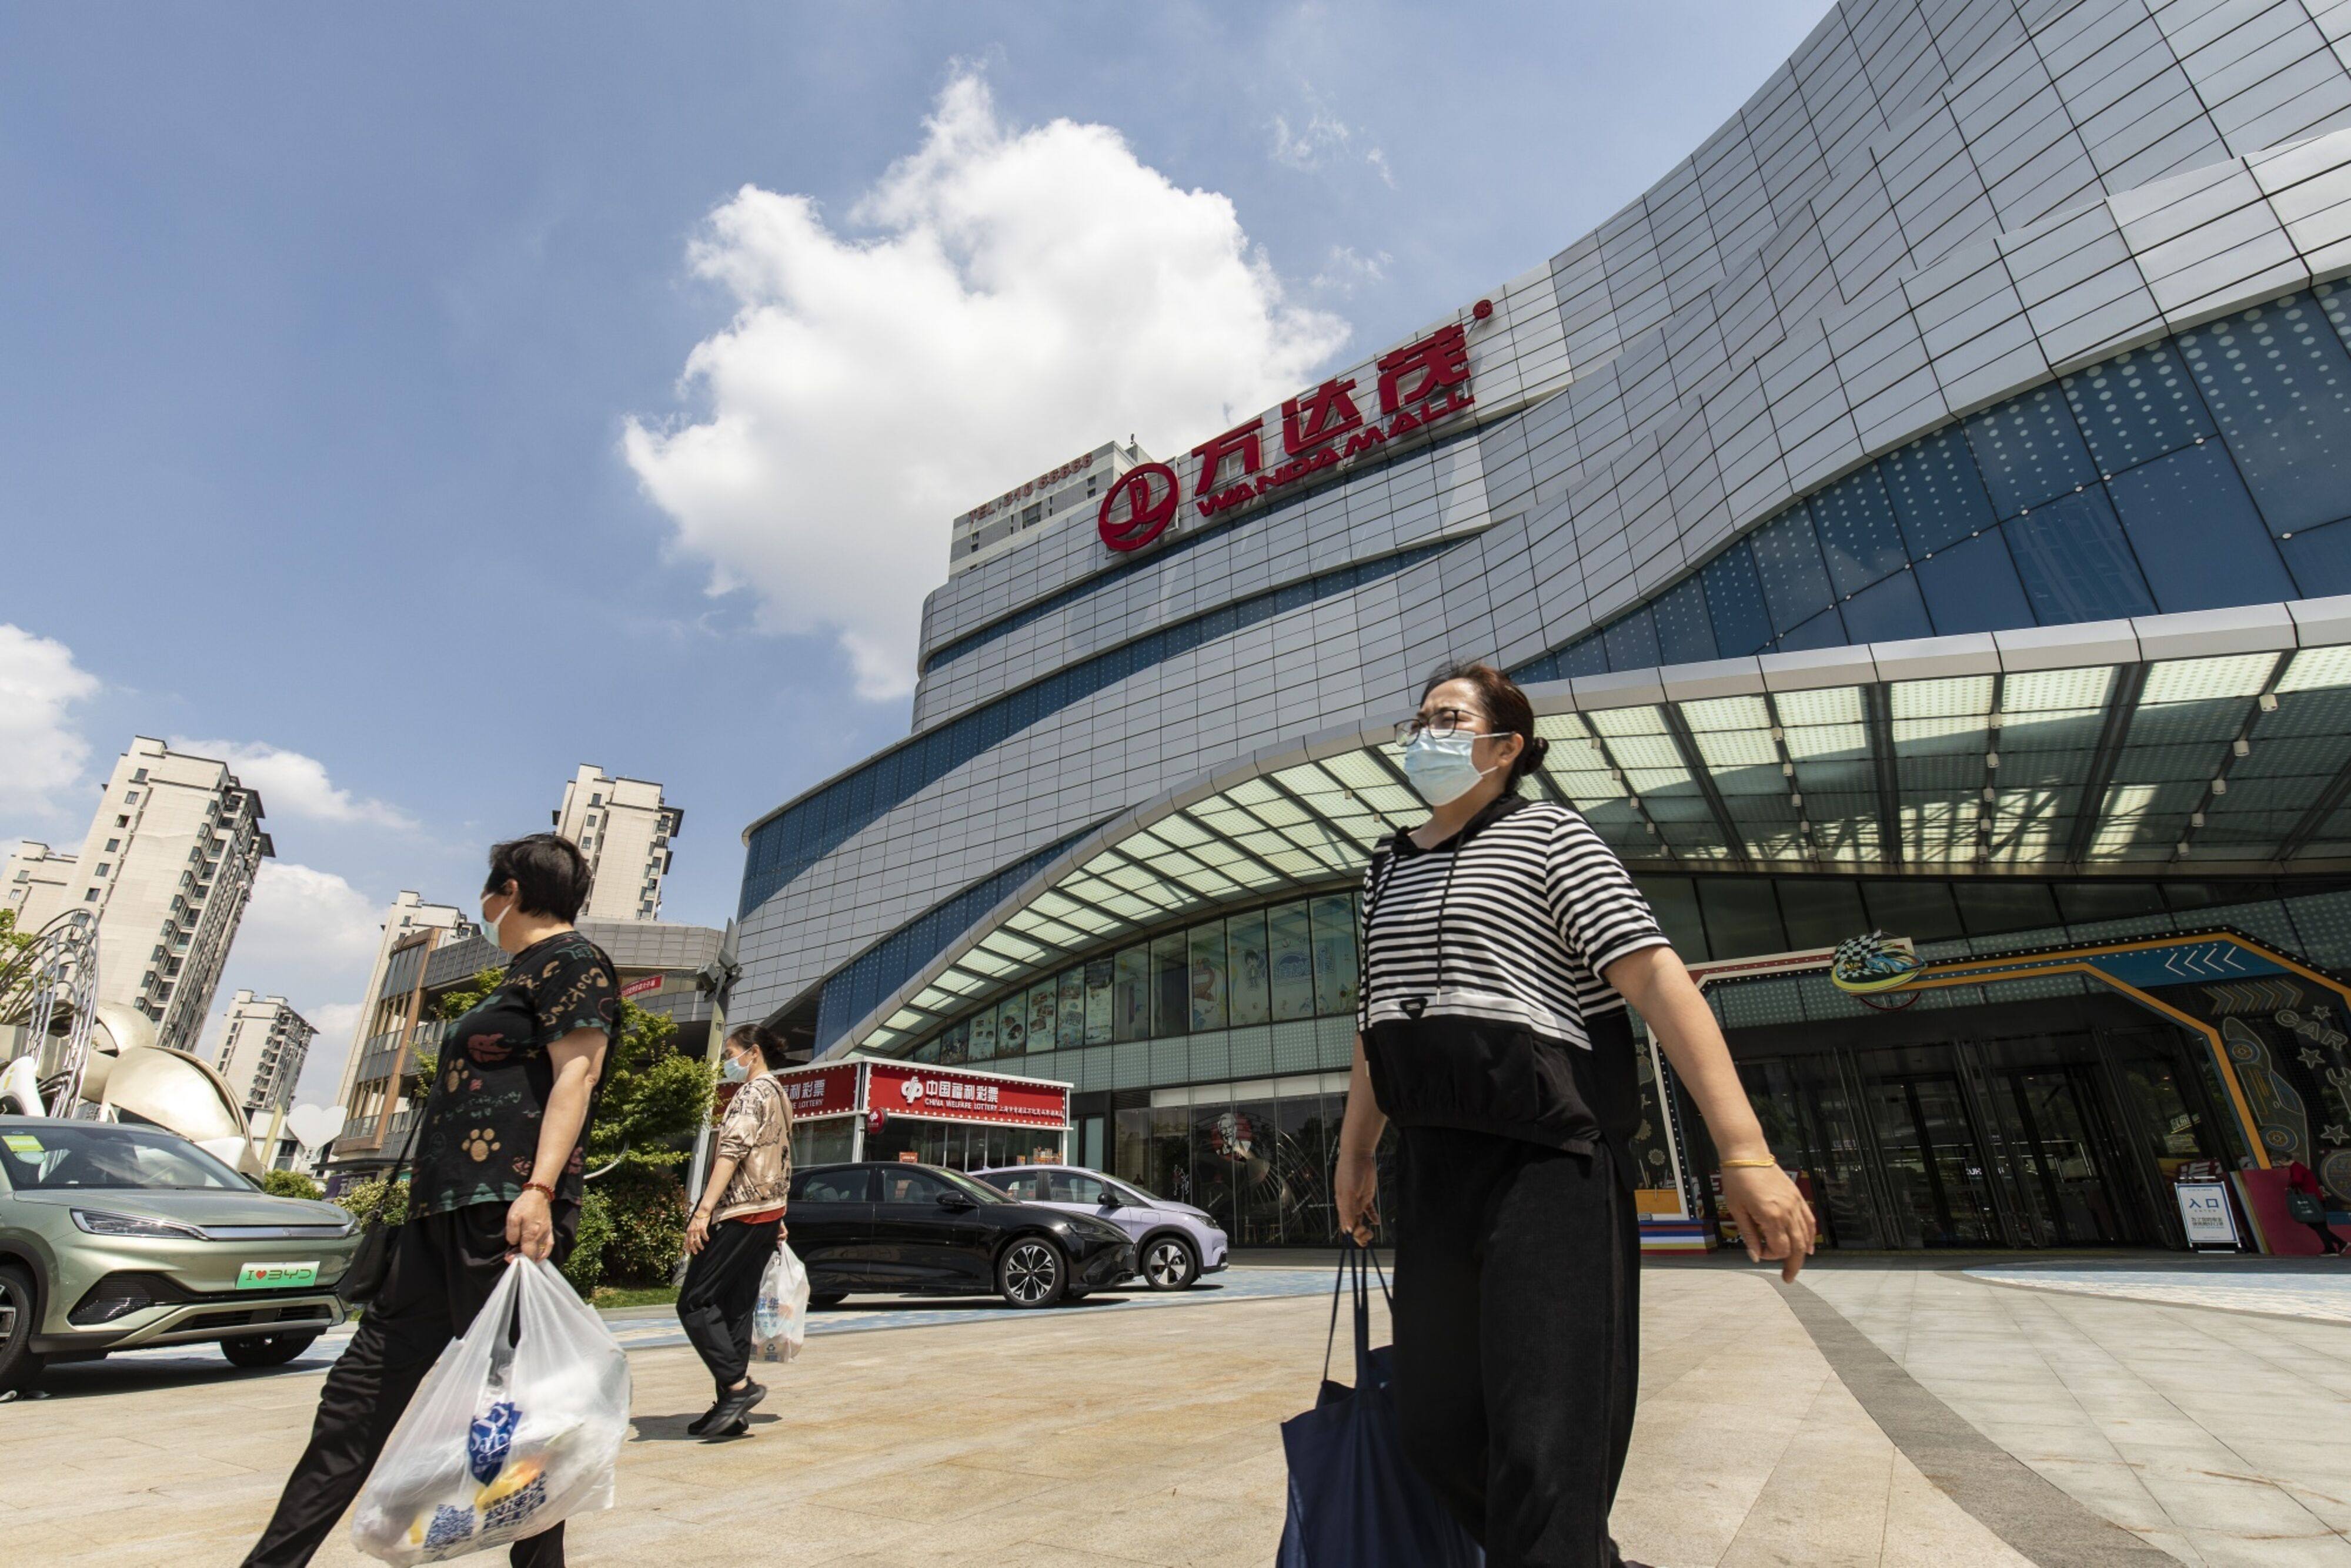 A Dalian Wanda shopping centre in Shanghai. The conglomerate has wrestled with a cash crunch this year as China’s property crisis continues to spiral. Photo: Bloomberg